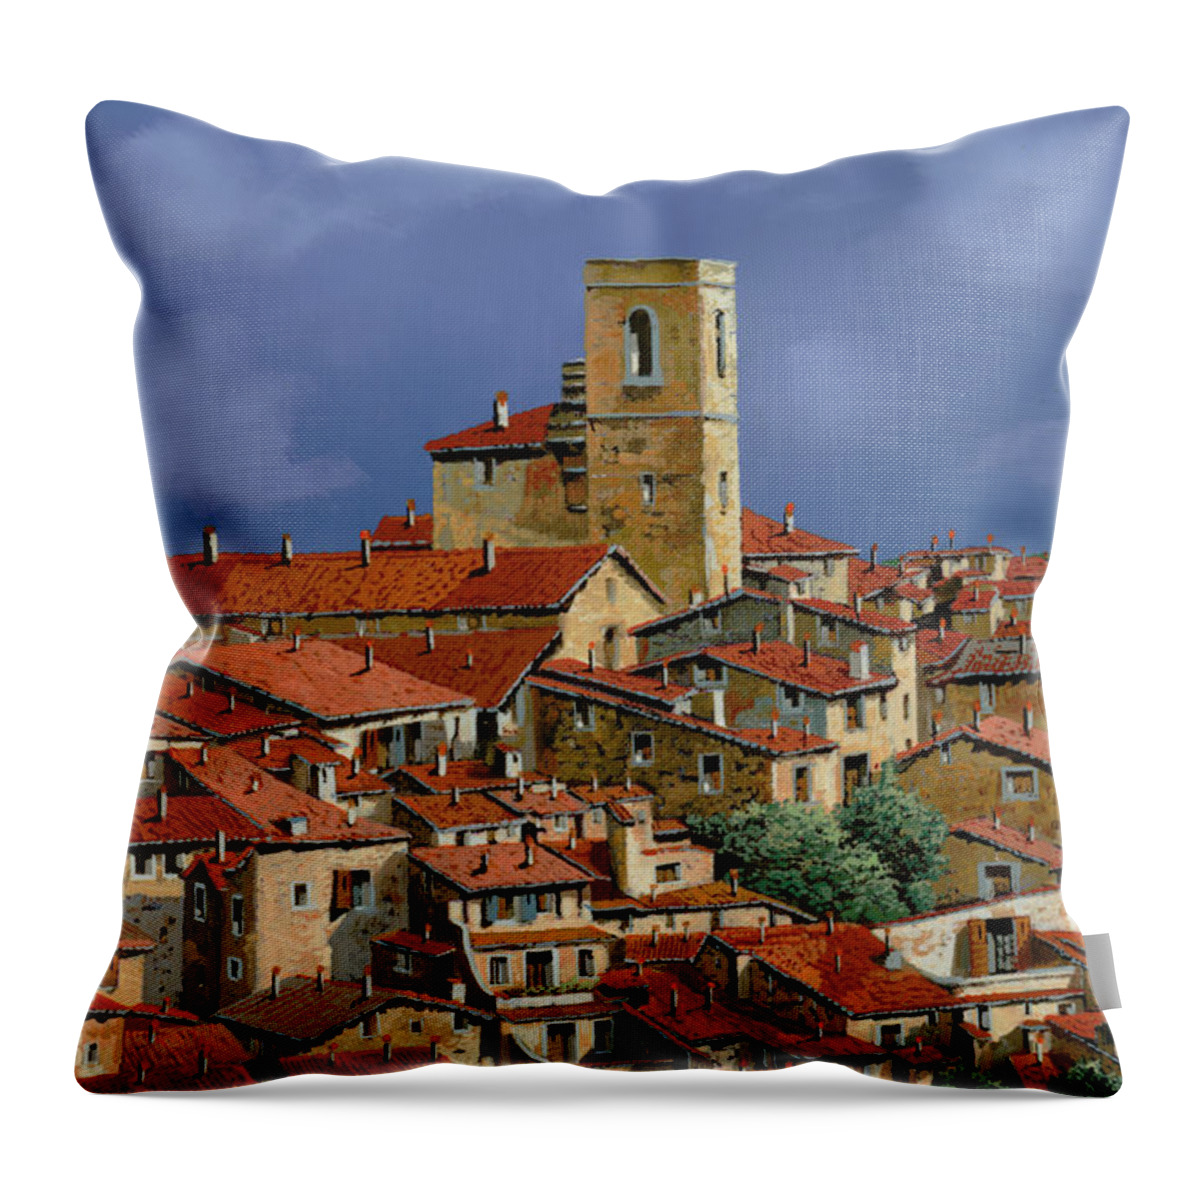 Clouds Throw Pillow featuring the painting Cielo A Pecorelle by Guido Borelli